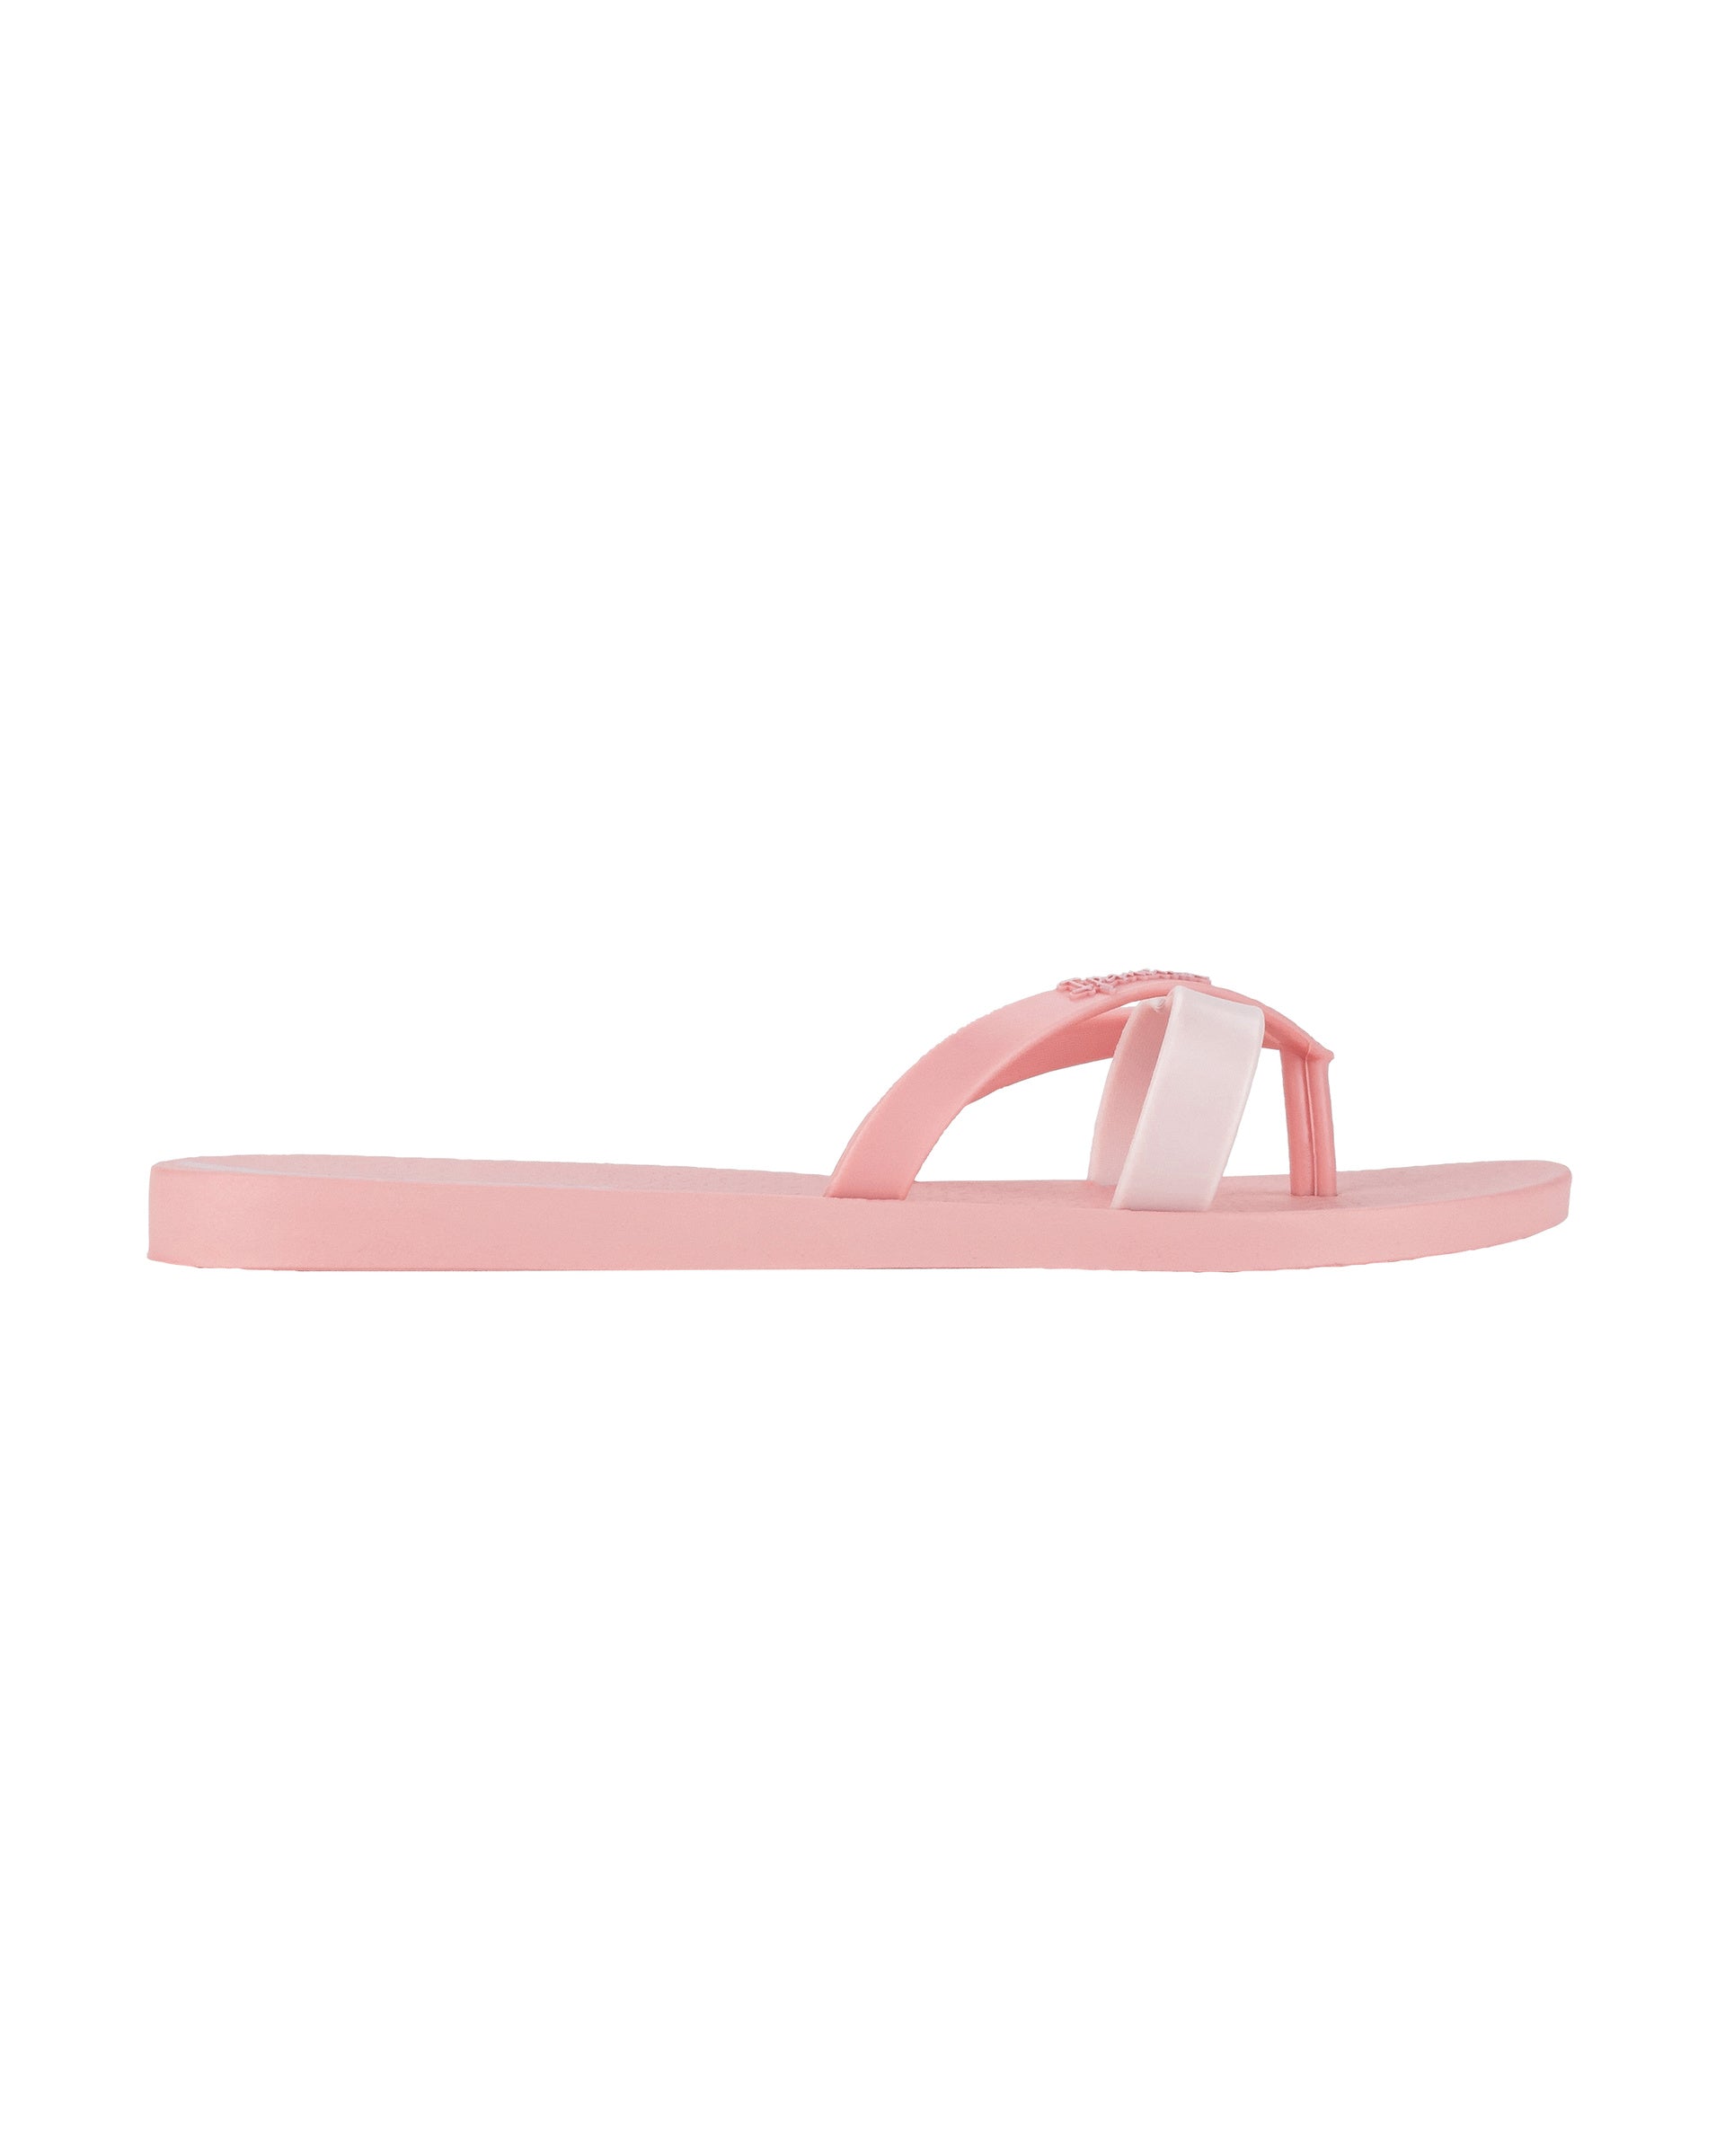 Outer side view of a pink Ipanema Kirei women's flip flop.